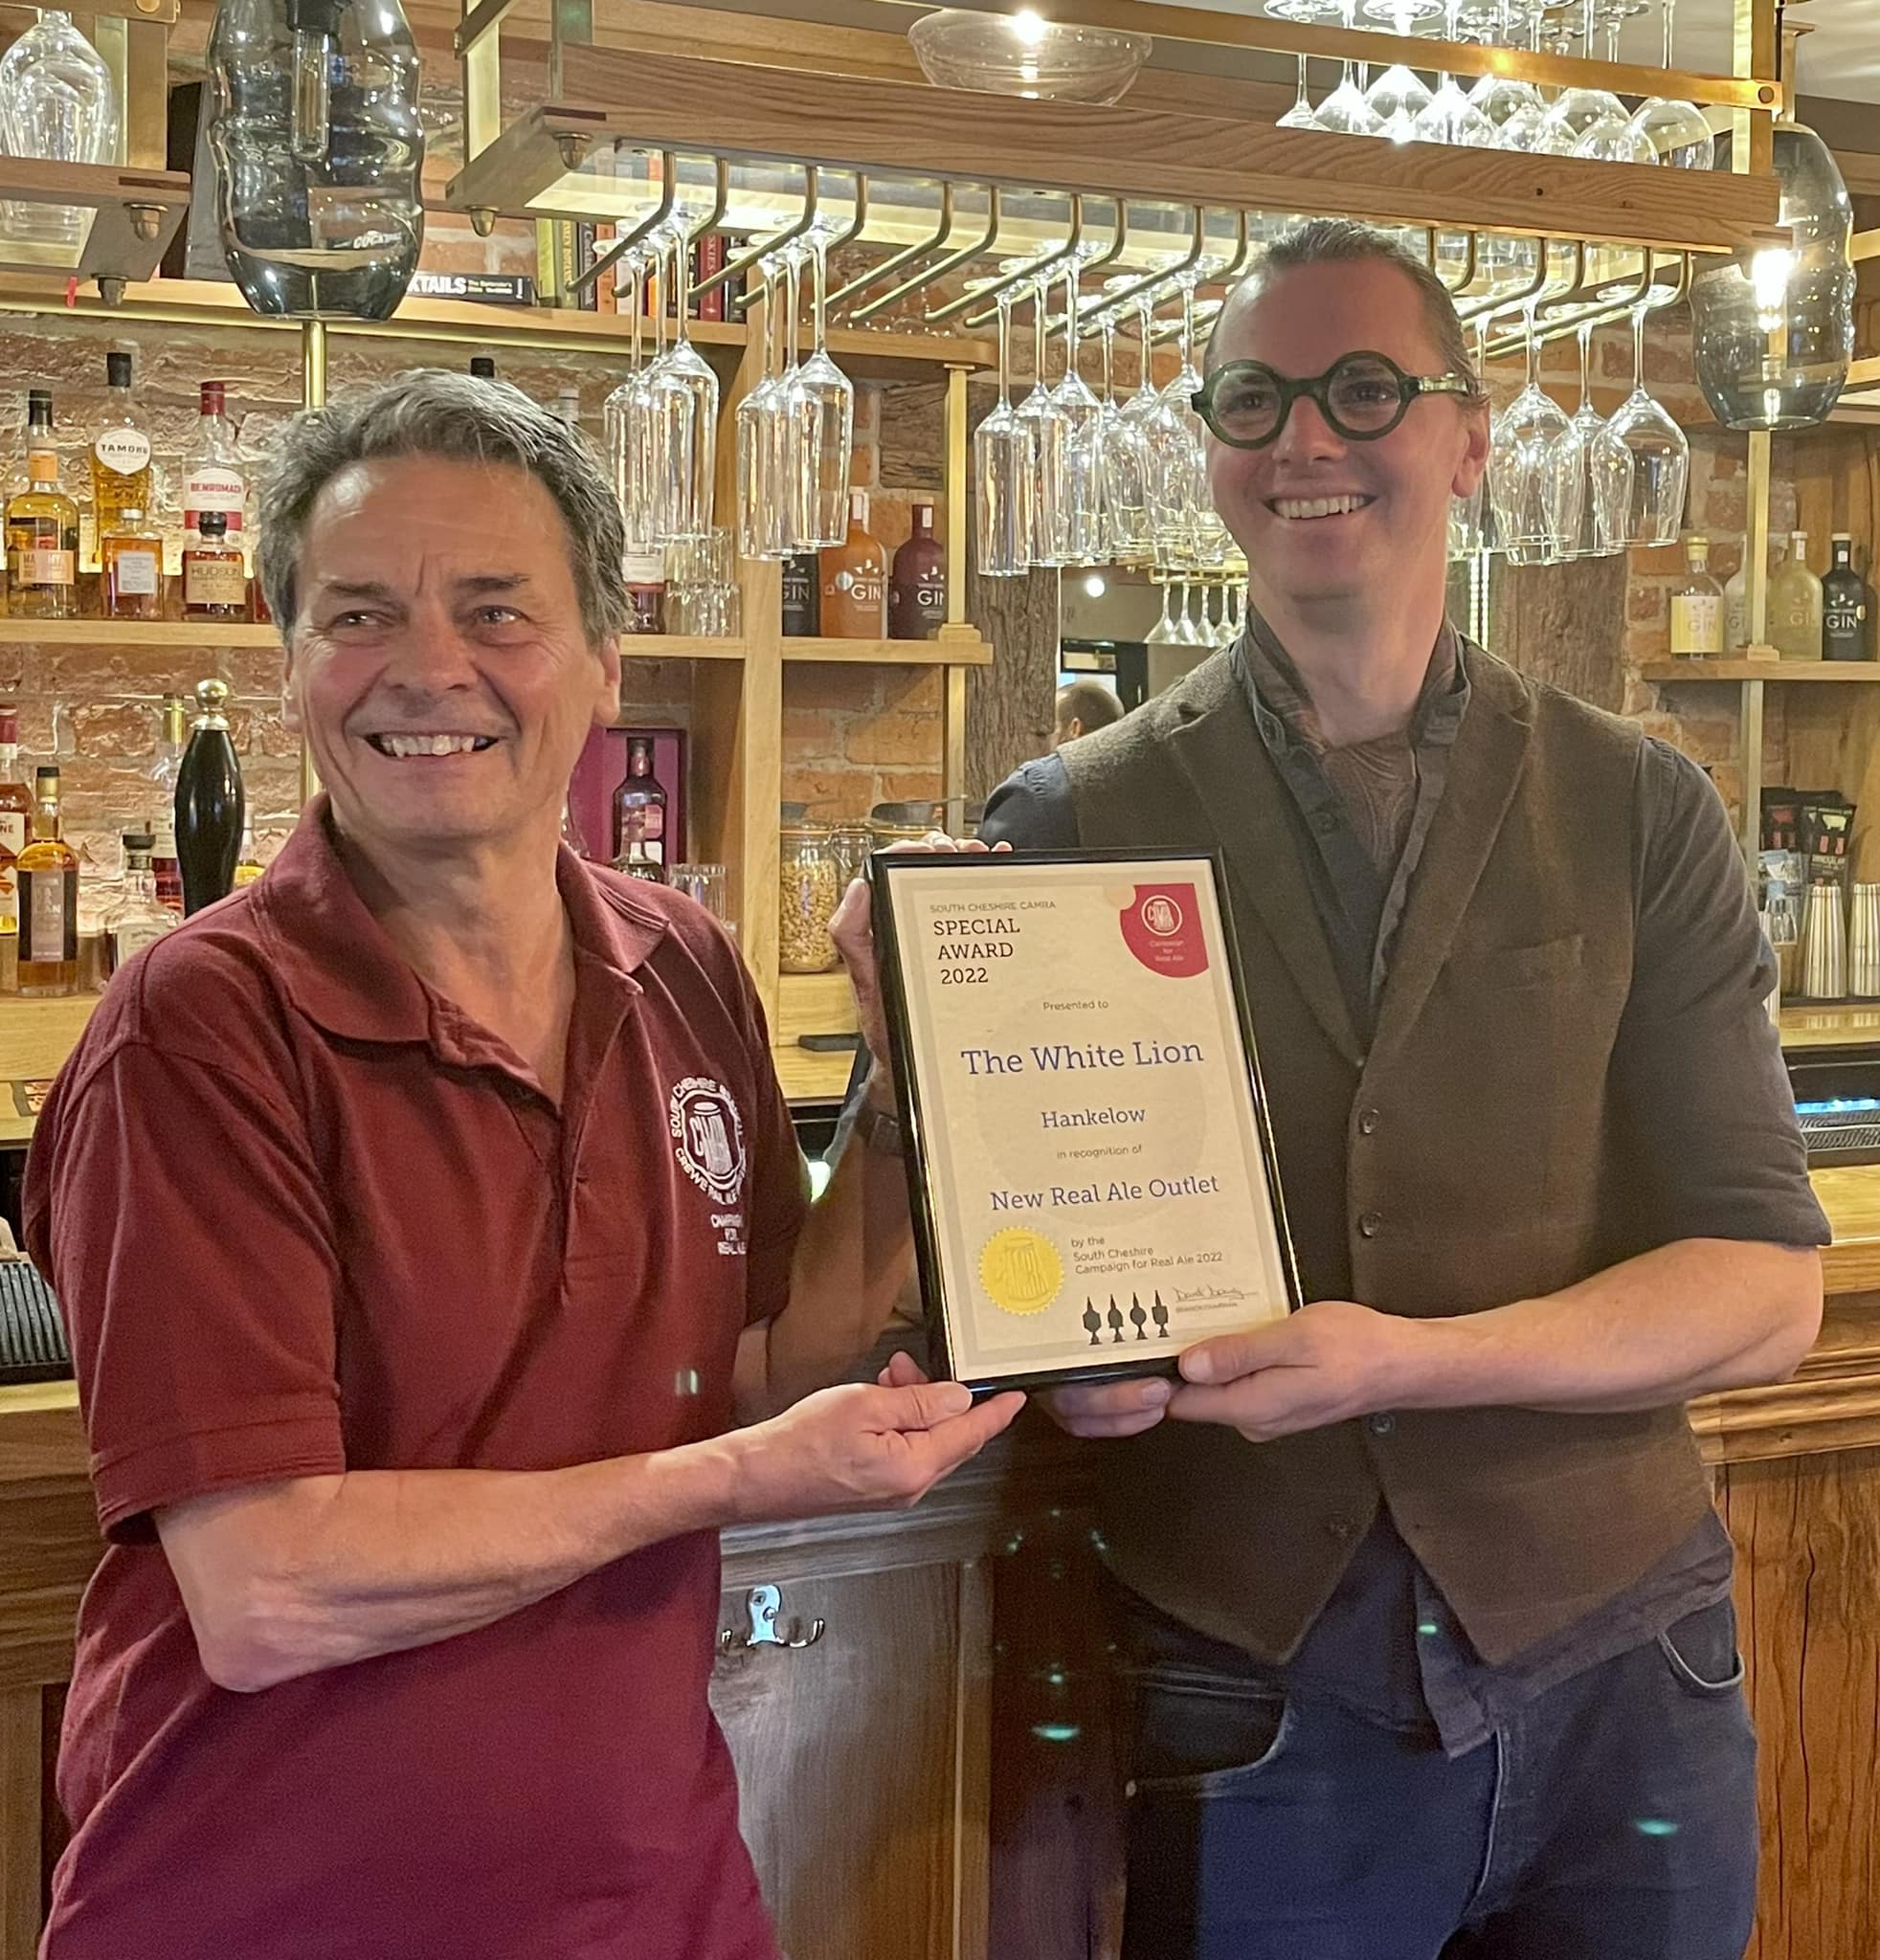 South Cheshire Camra presenting certificate